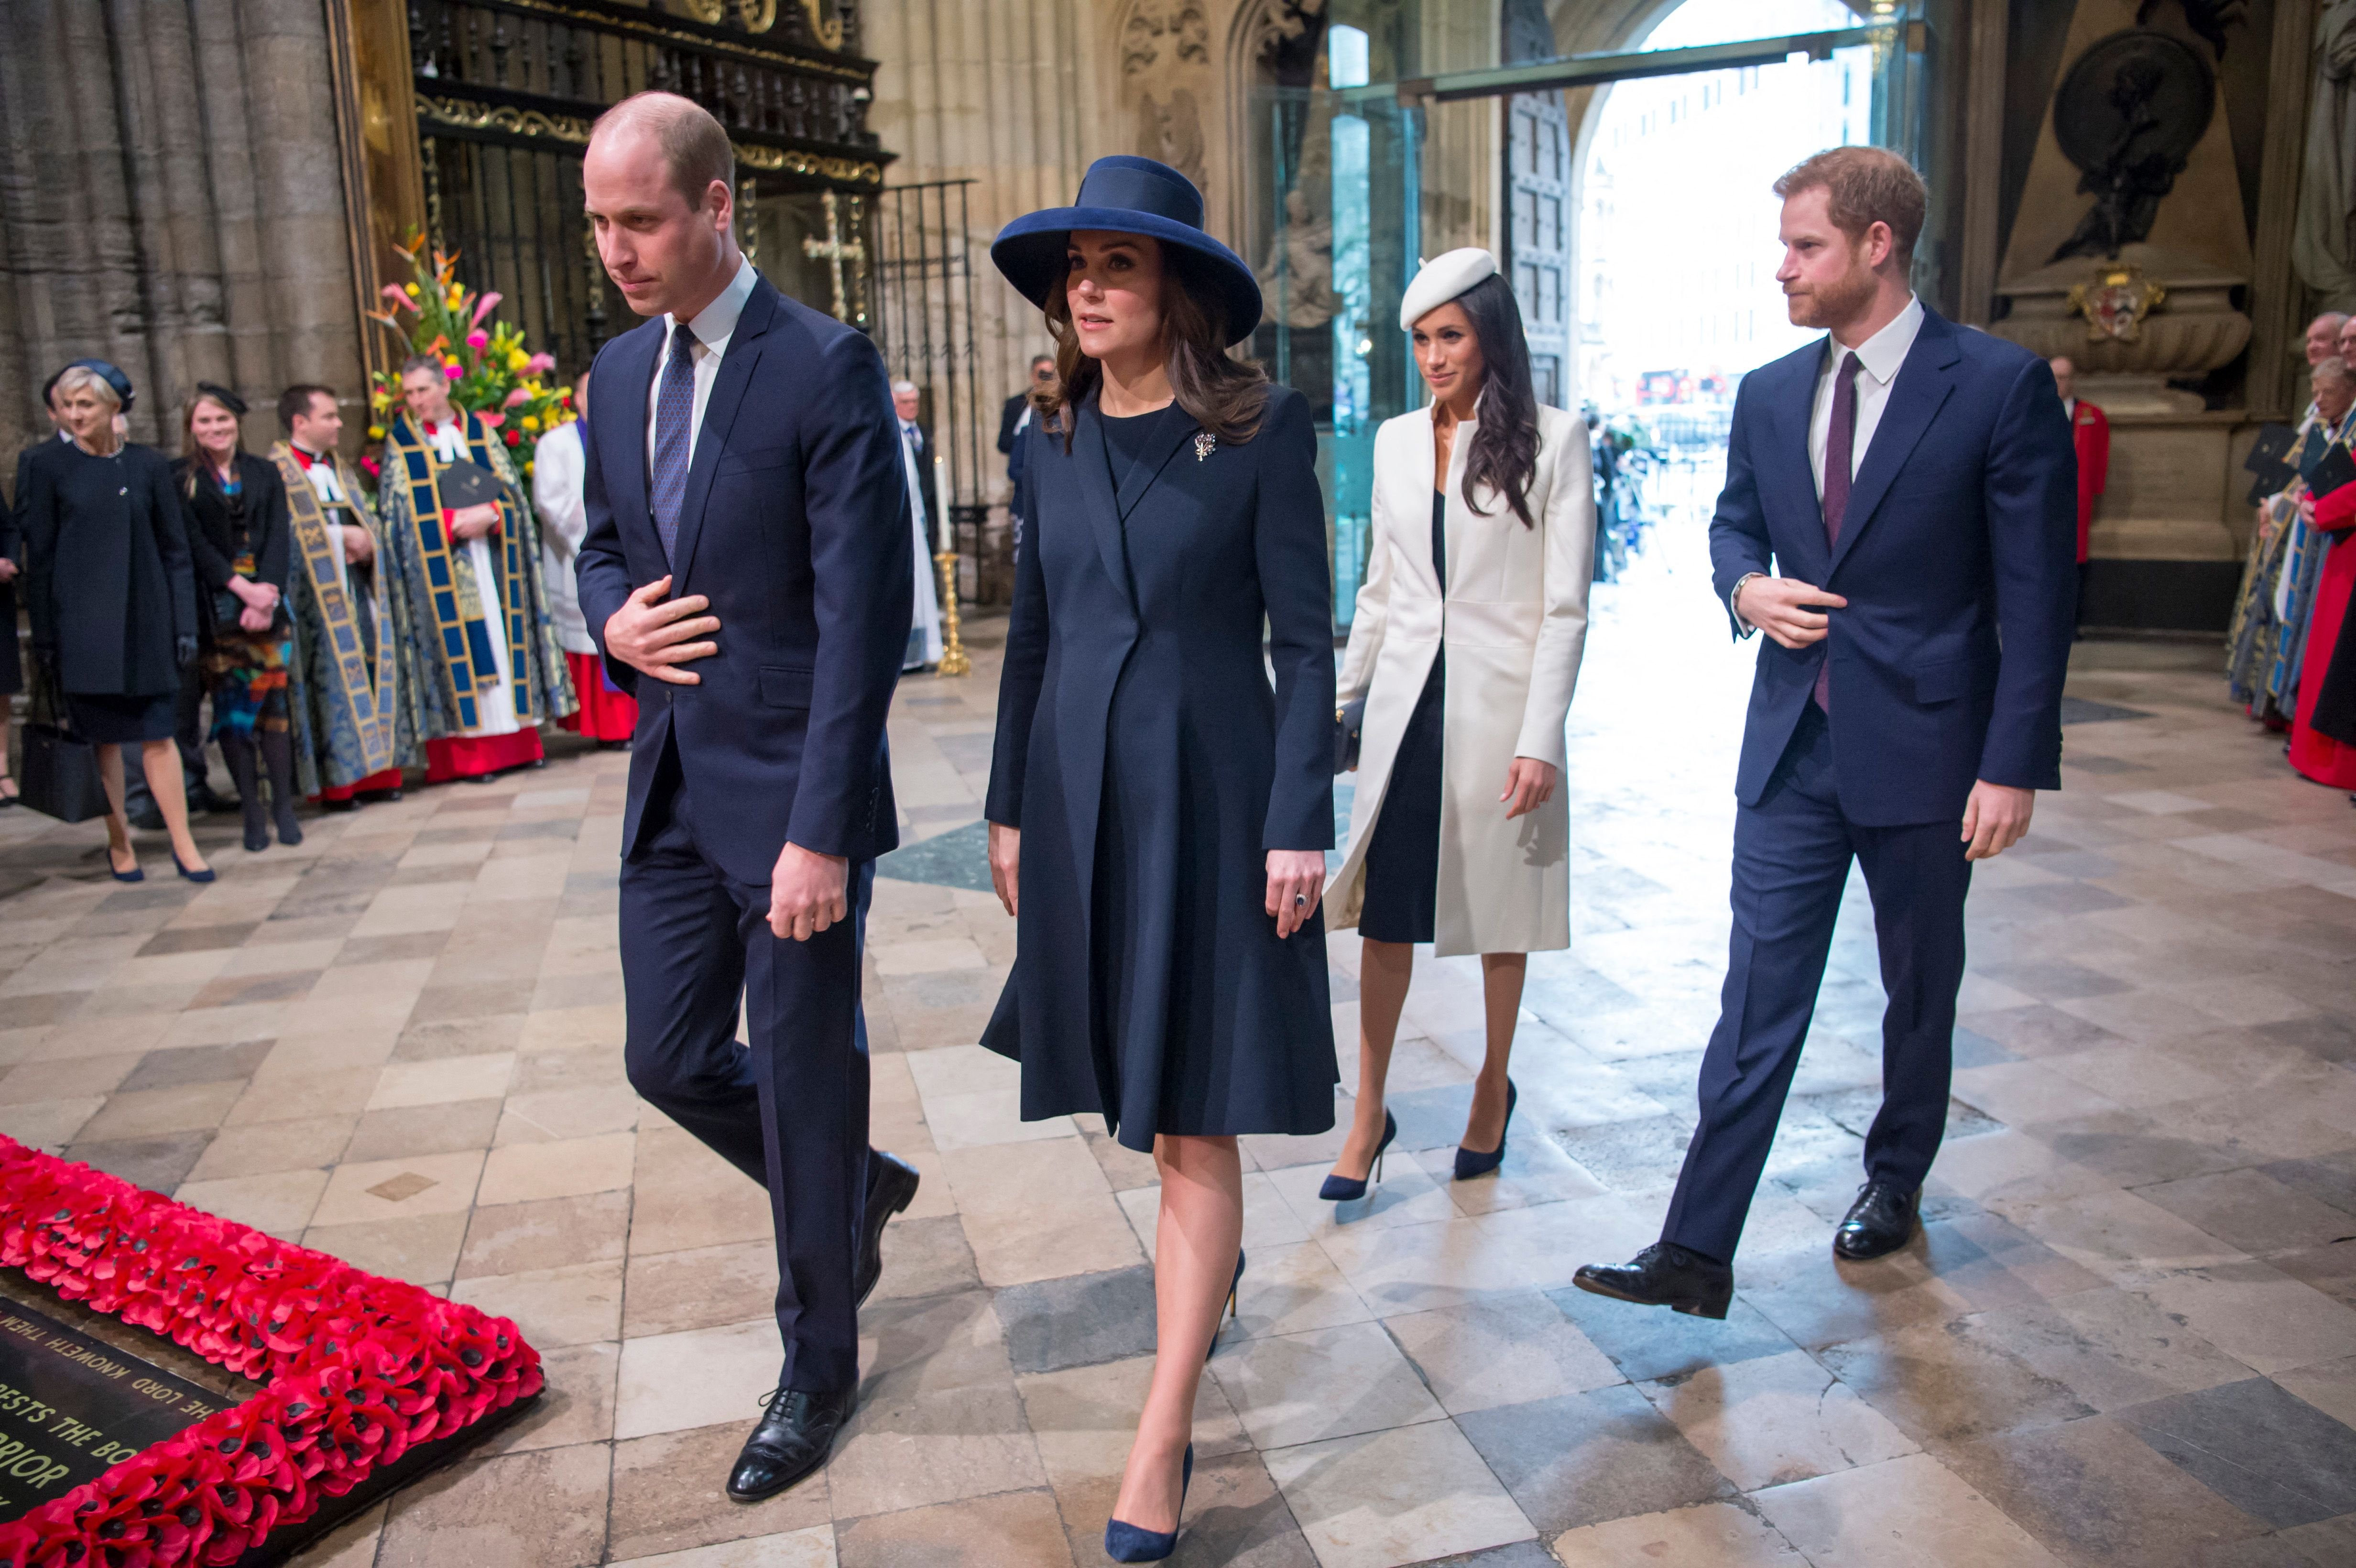 Prince William, Kate Middleton, Meghan Markle, and Prince Harry attend a Commonwealth Day Service at Westminster Abbey in central London, on March 12, 2018 | Sourc: Getty Images